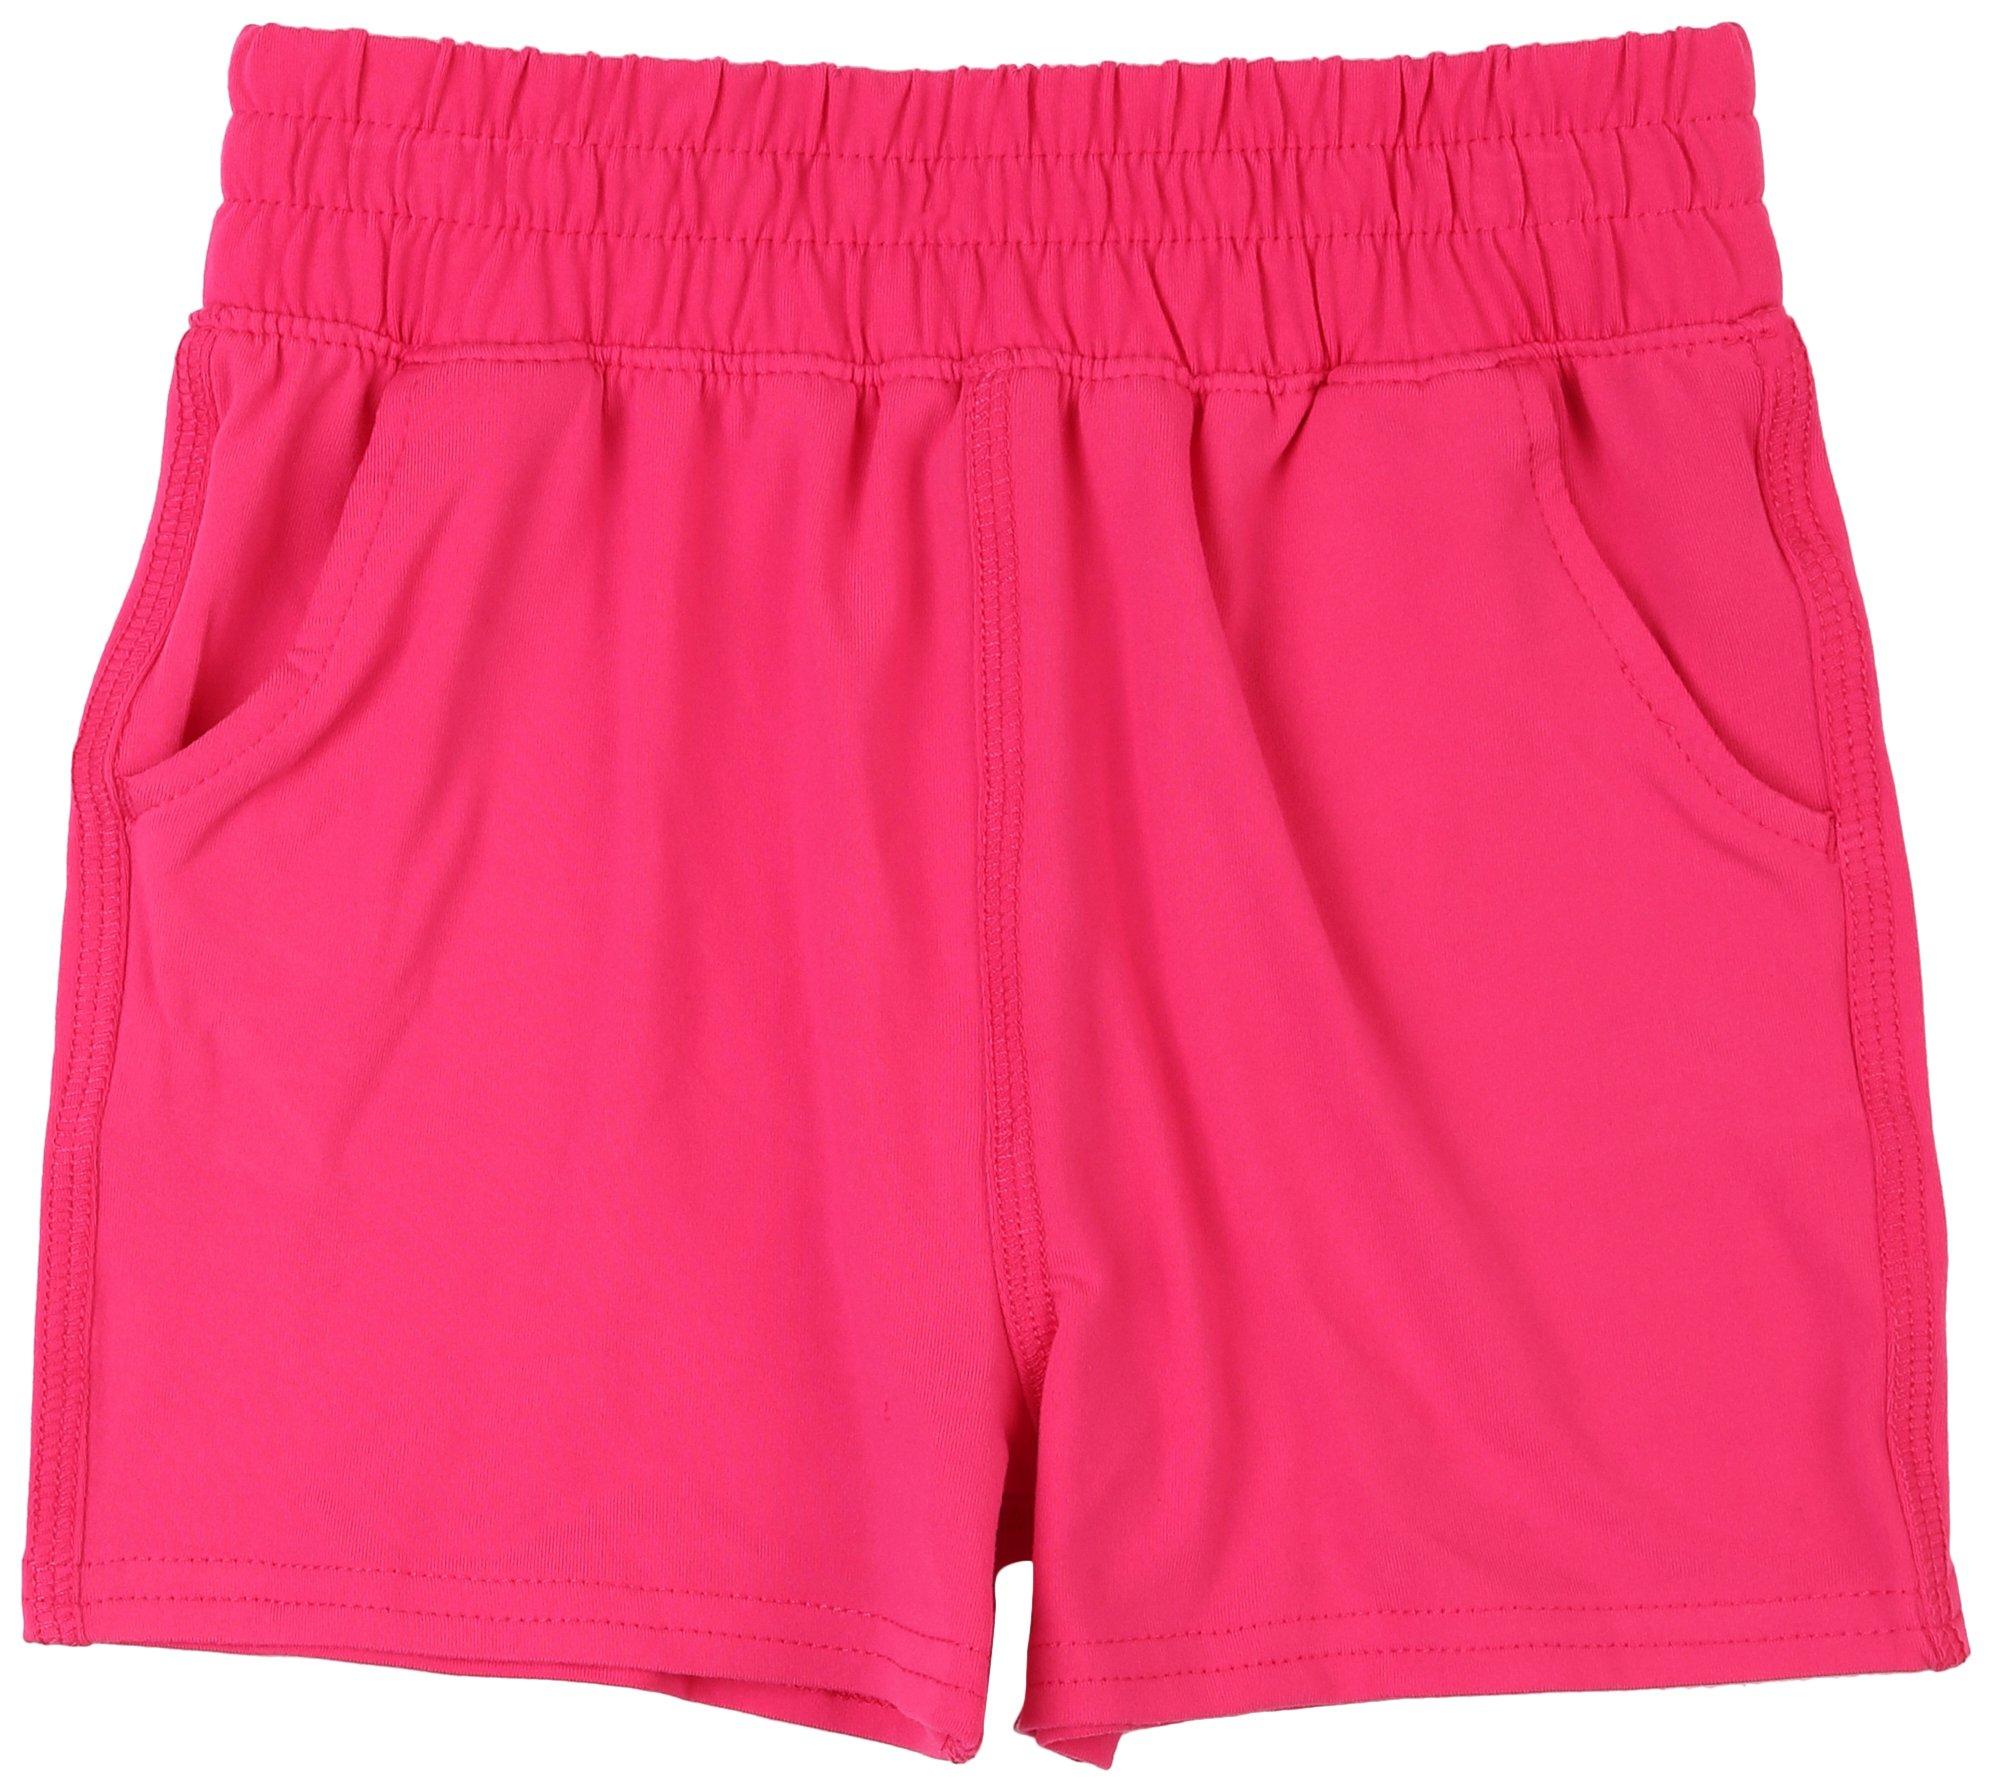 Toddler Girls Pull On Knit Shorts